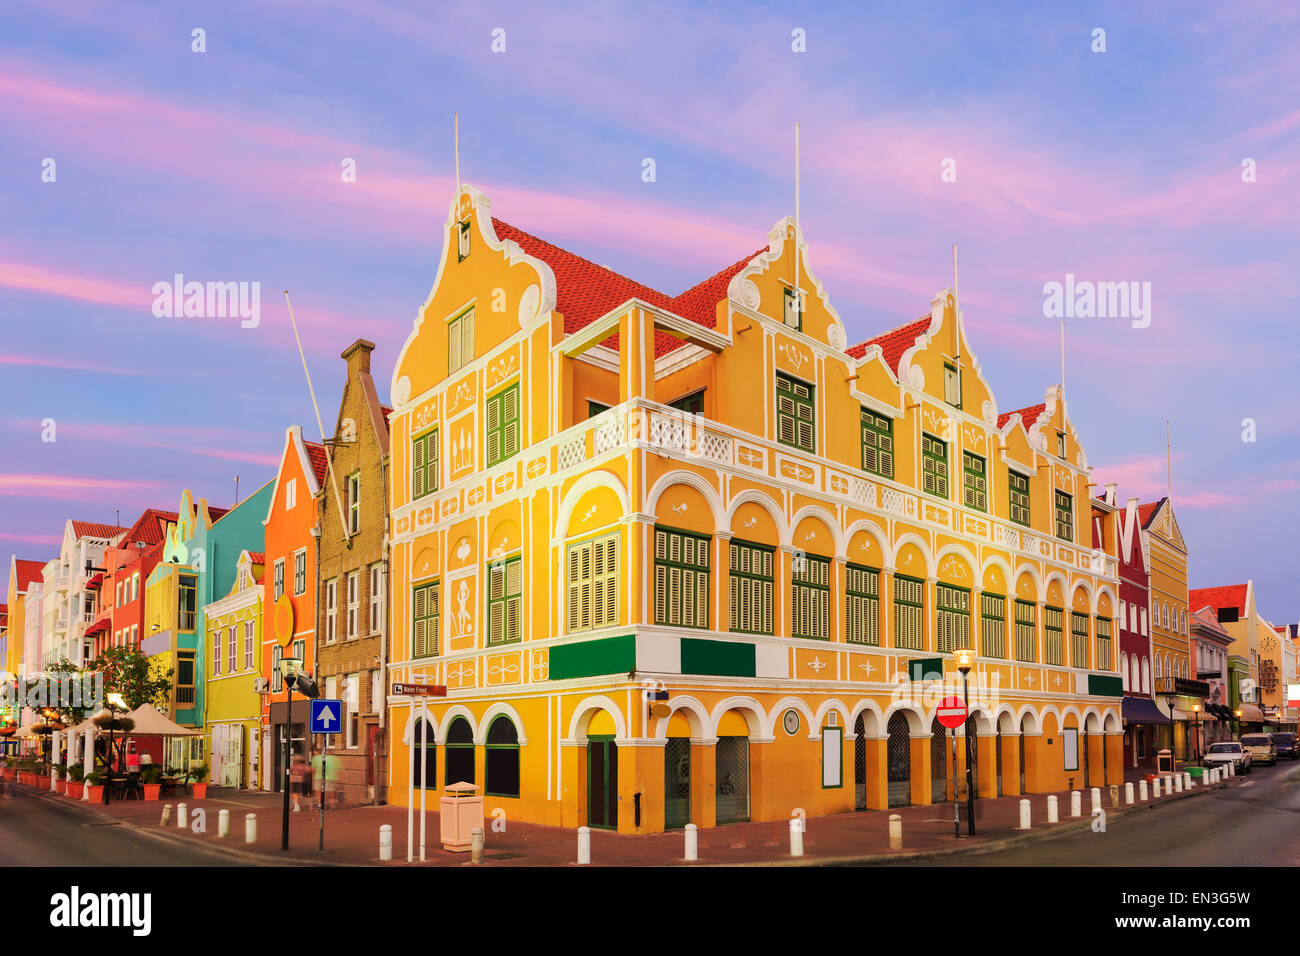 Downtown Willemstad al crepuscolo, Curacao, Antille olandesi Foto Stock